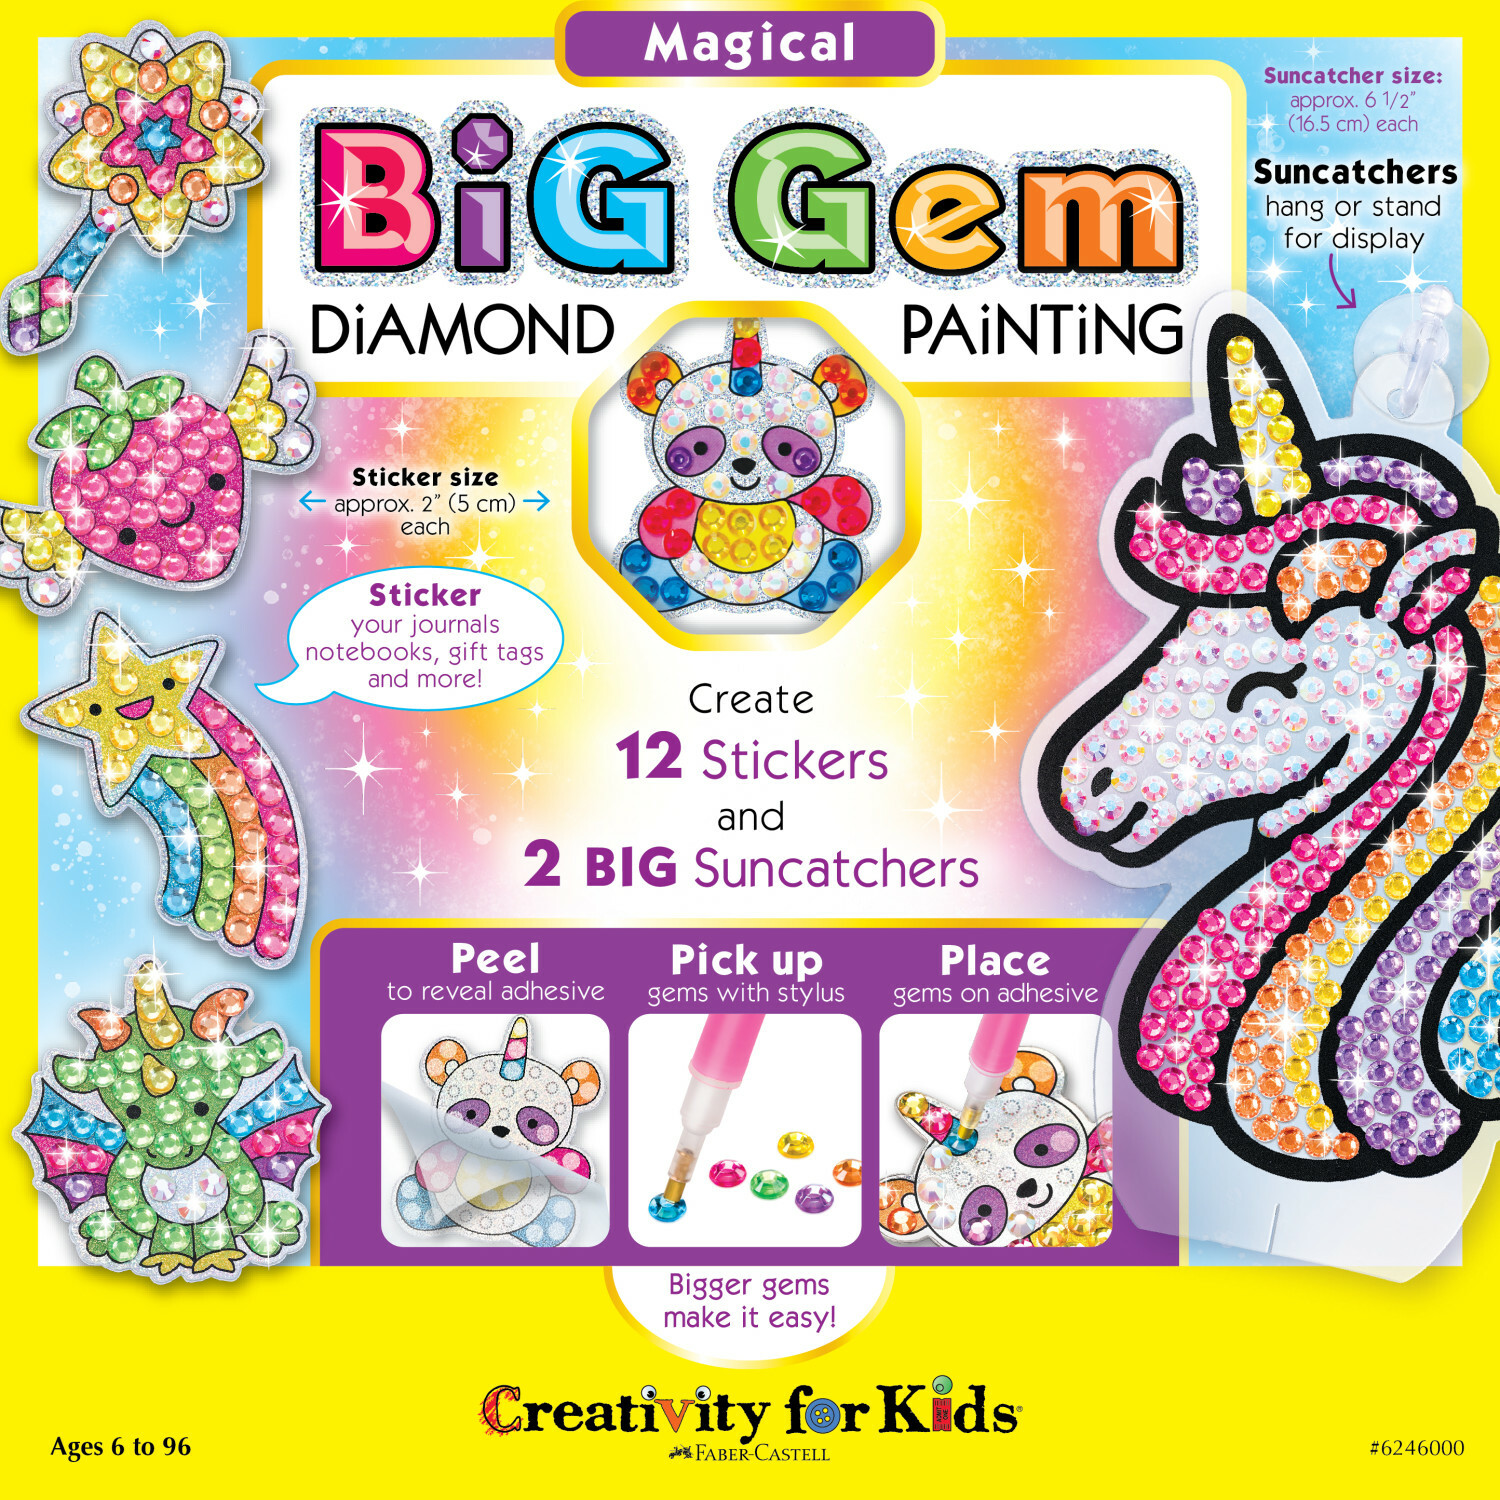 Big Gem Diamond Painting - Magical from Faber-Castell - School